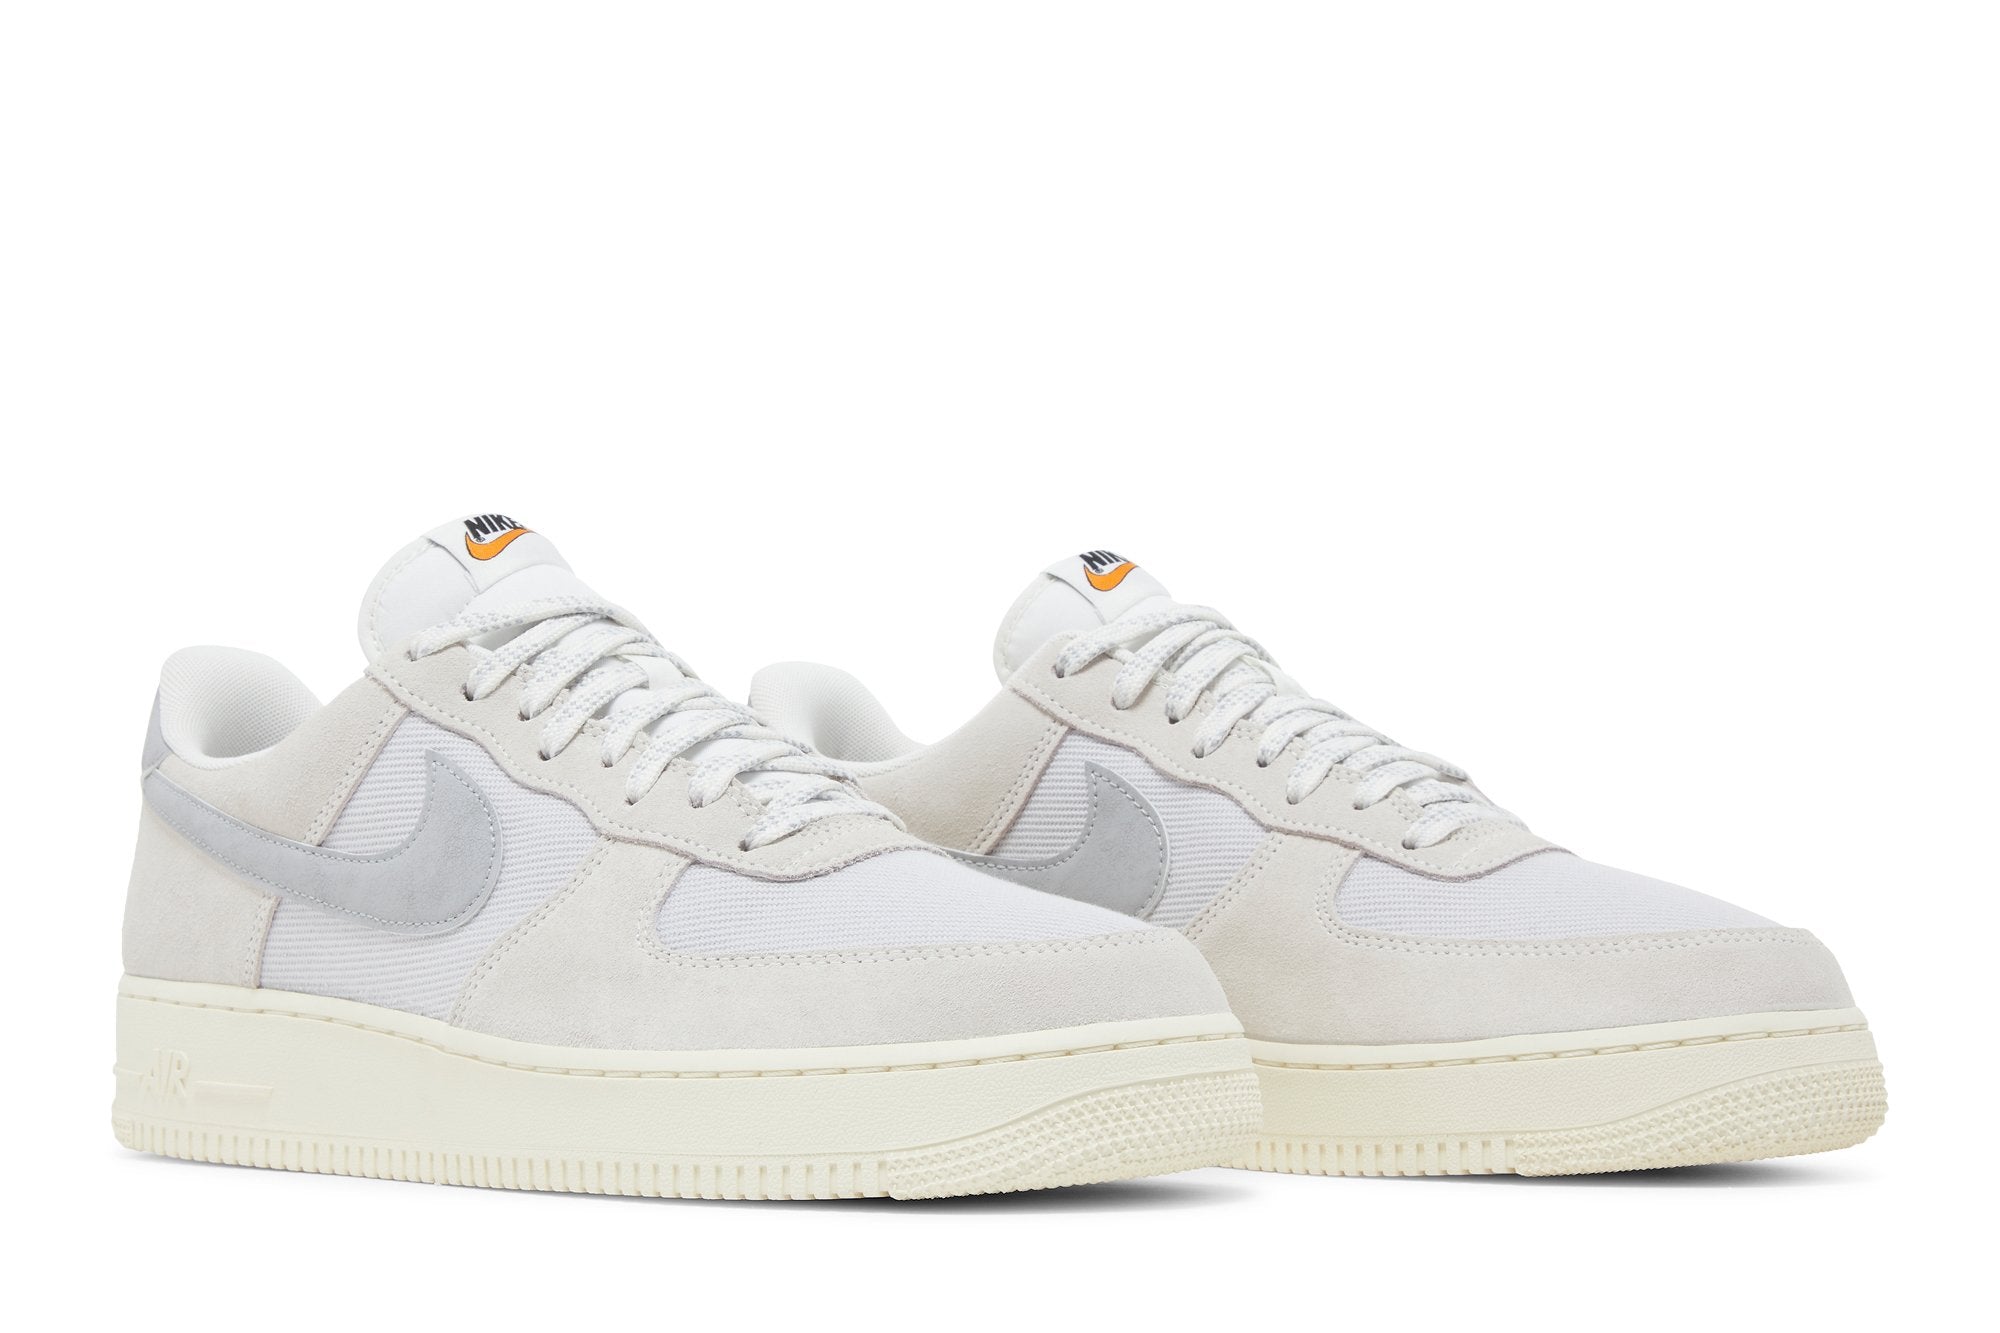 Nike Air Froce 1 Low '07 Vintage - Certified Fresh Photon Dust Sail ()